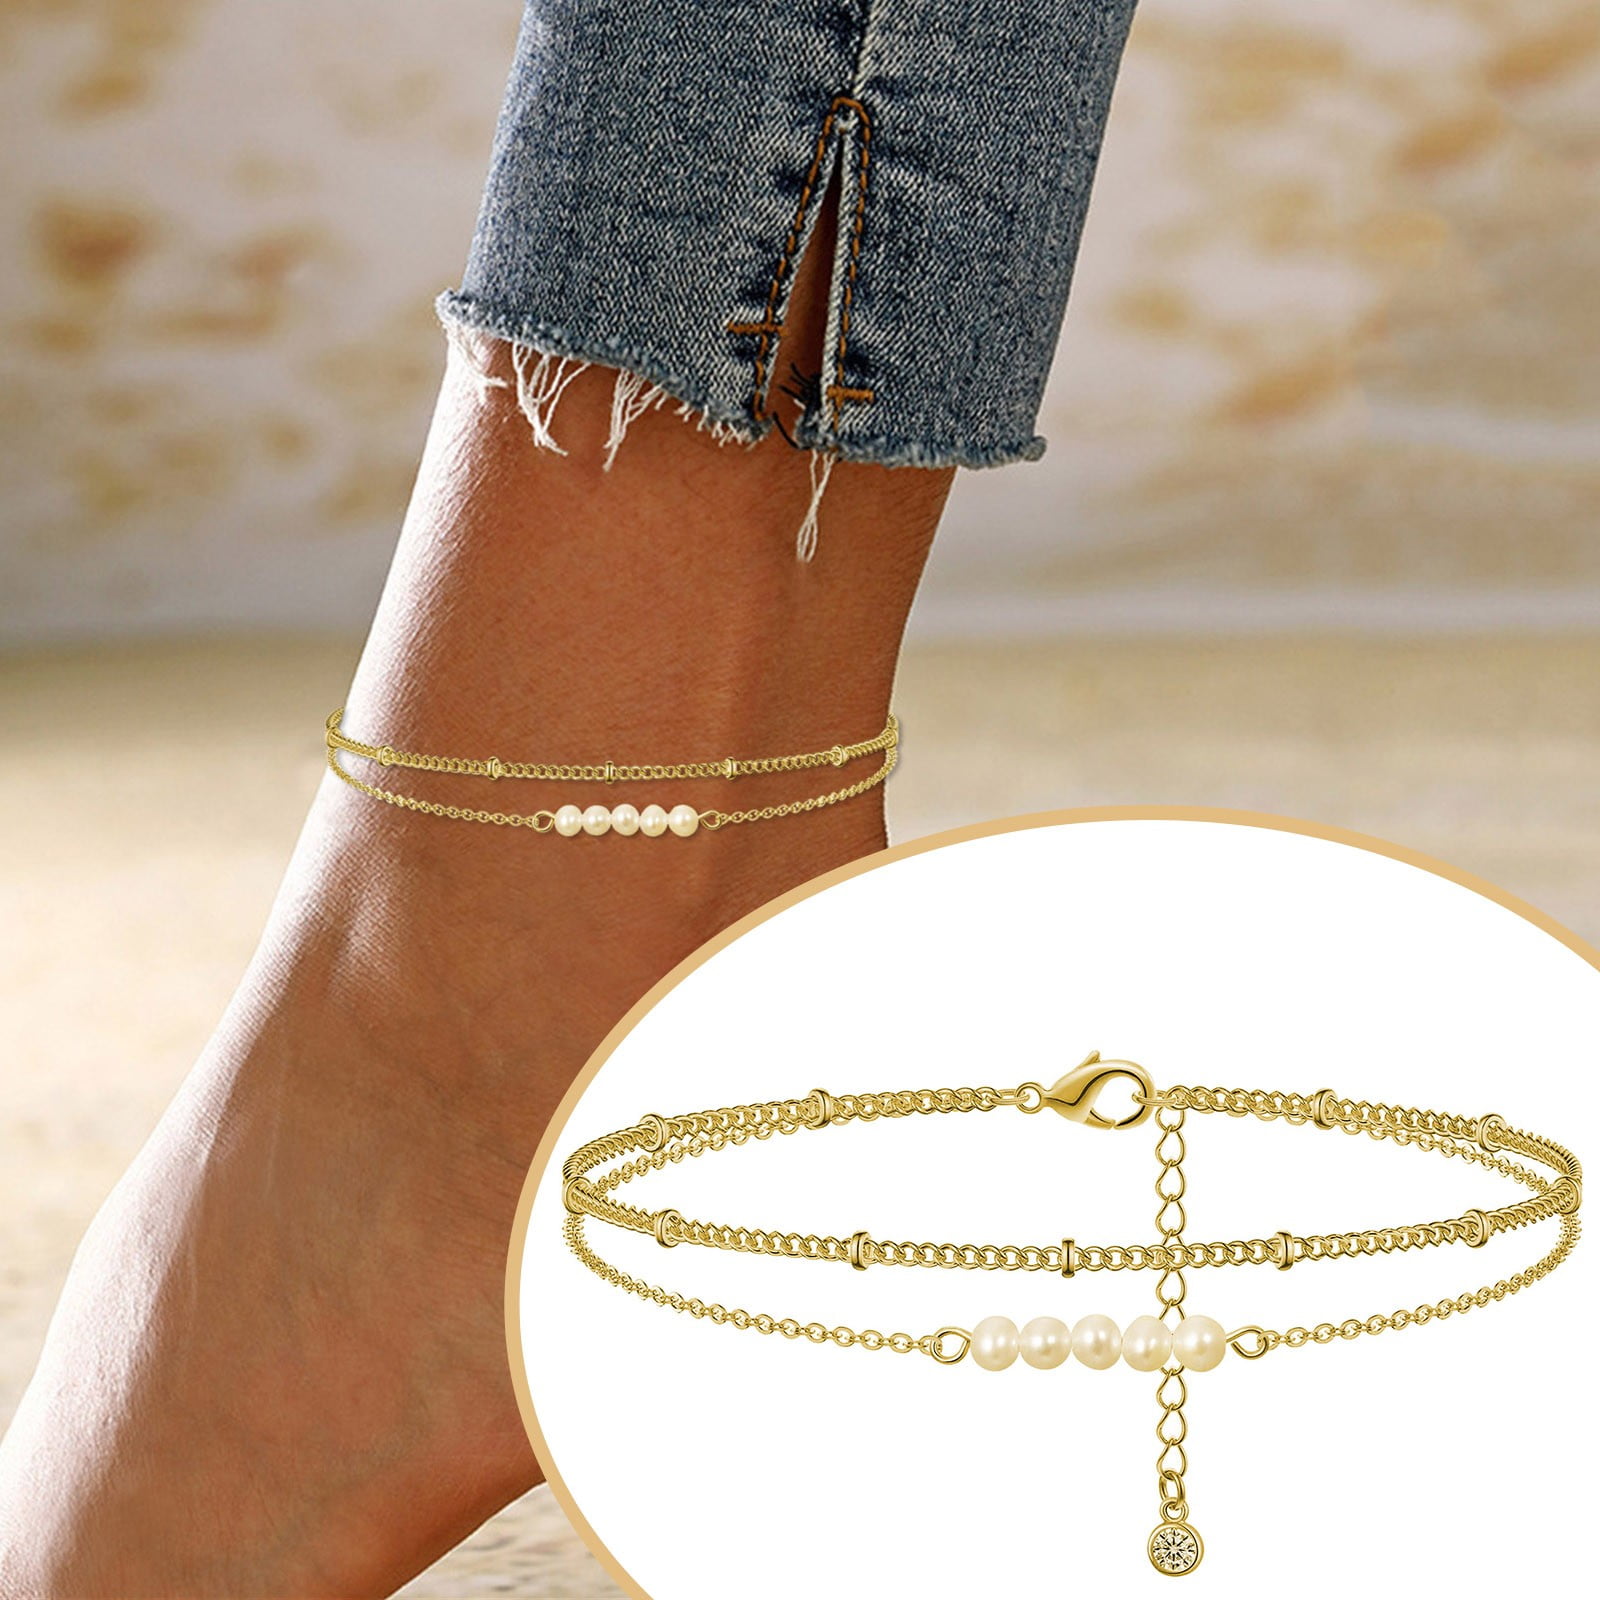 keusn boho double layer gold beach anklets for pearl pendant h anklets women chains beads ankle bracelet foot bracelet